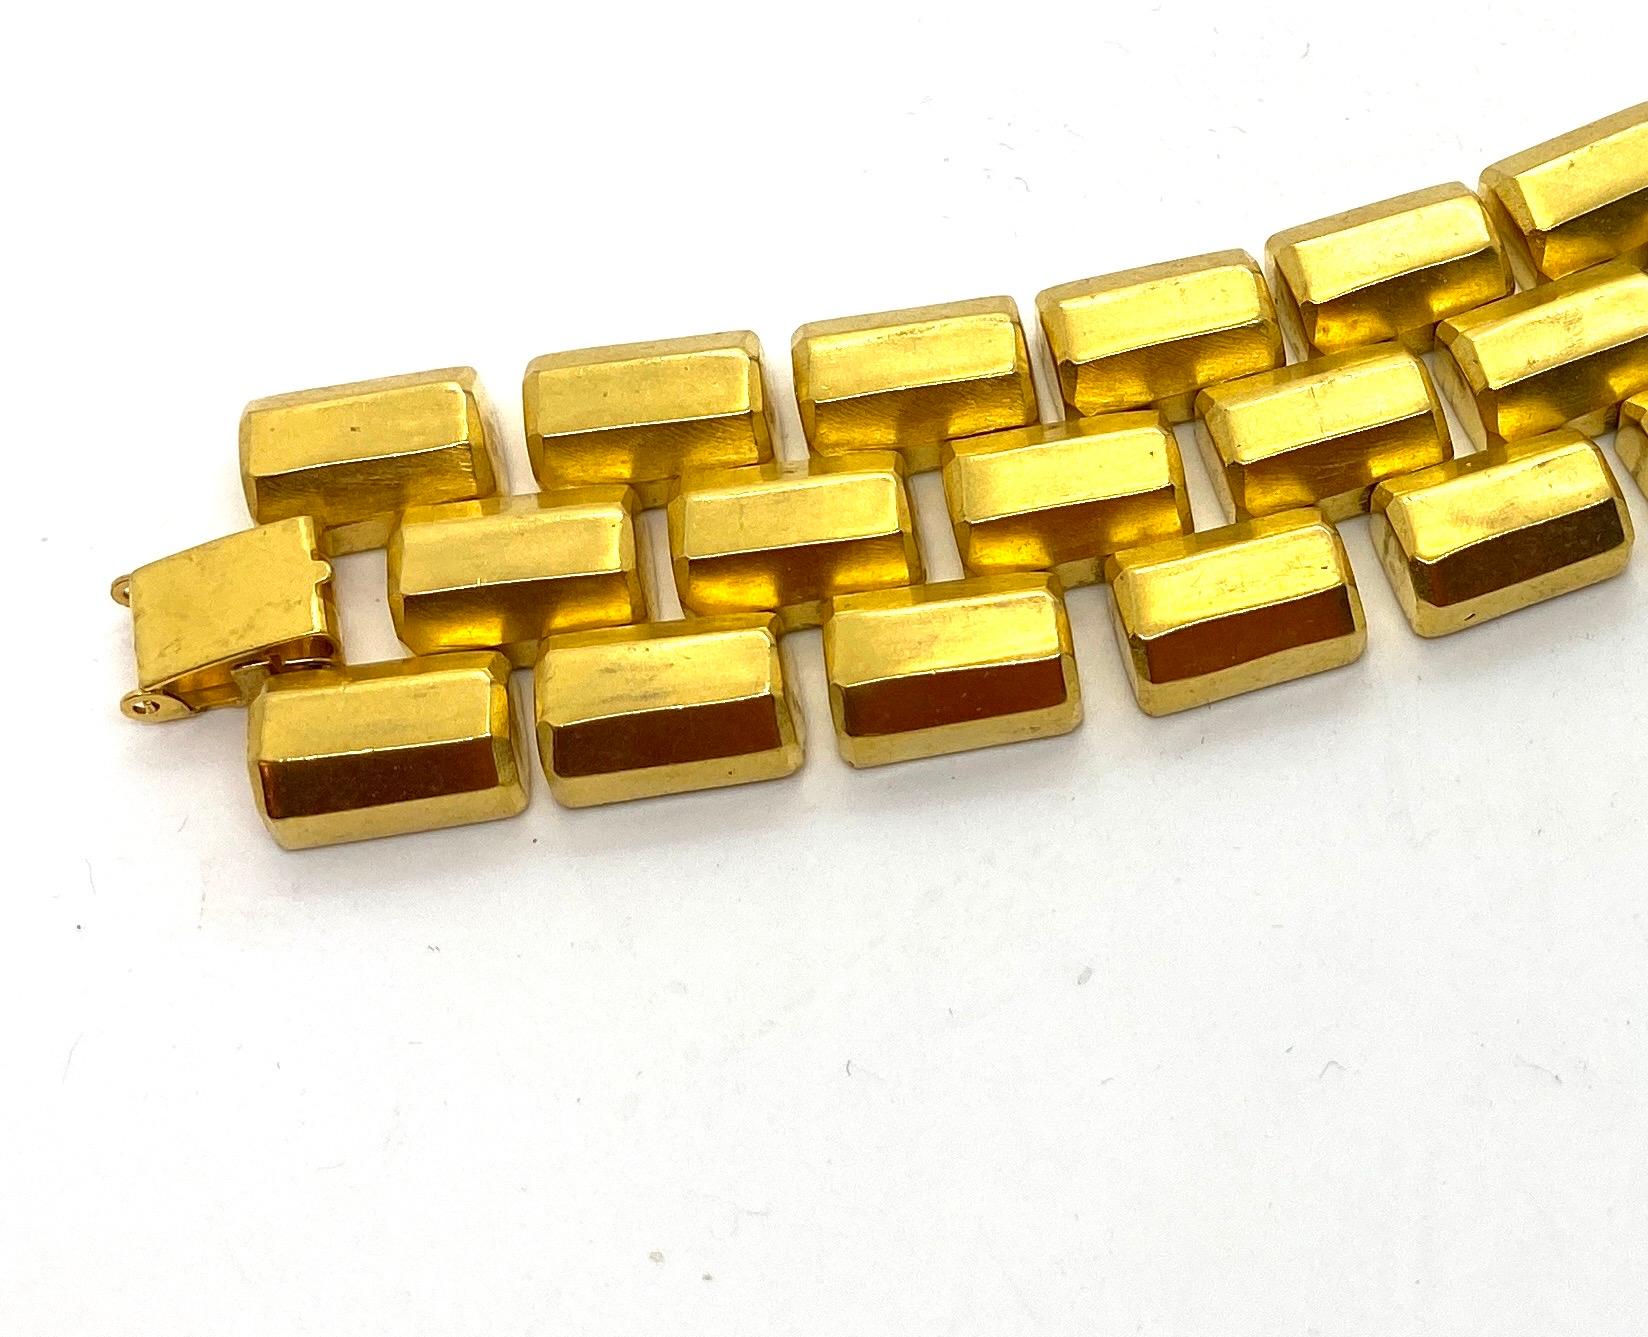 This glamorous wide link bracelet is iconic of the Bold Gold trend that was created by Robert Lee Morris and Donna Karan during the height of the 1980's. Inspired by the brick-lay construction (using rich 24k gold plated brass castings), from the